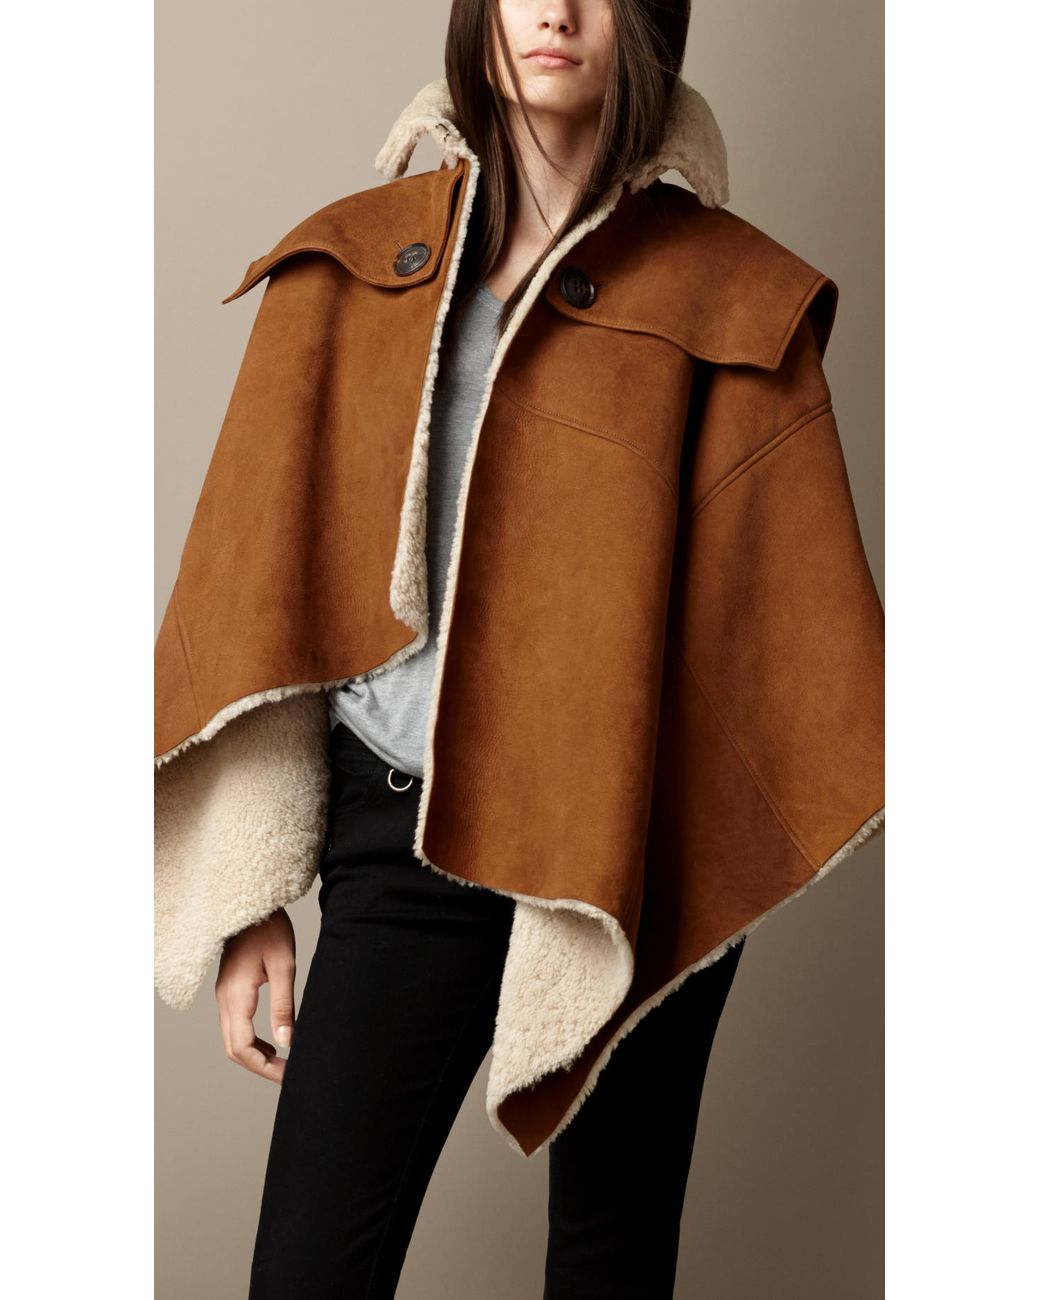 Burberry Shearling Poncho Cape in Camel (Brown) | Lyst